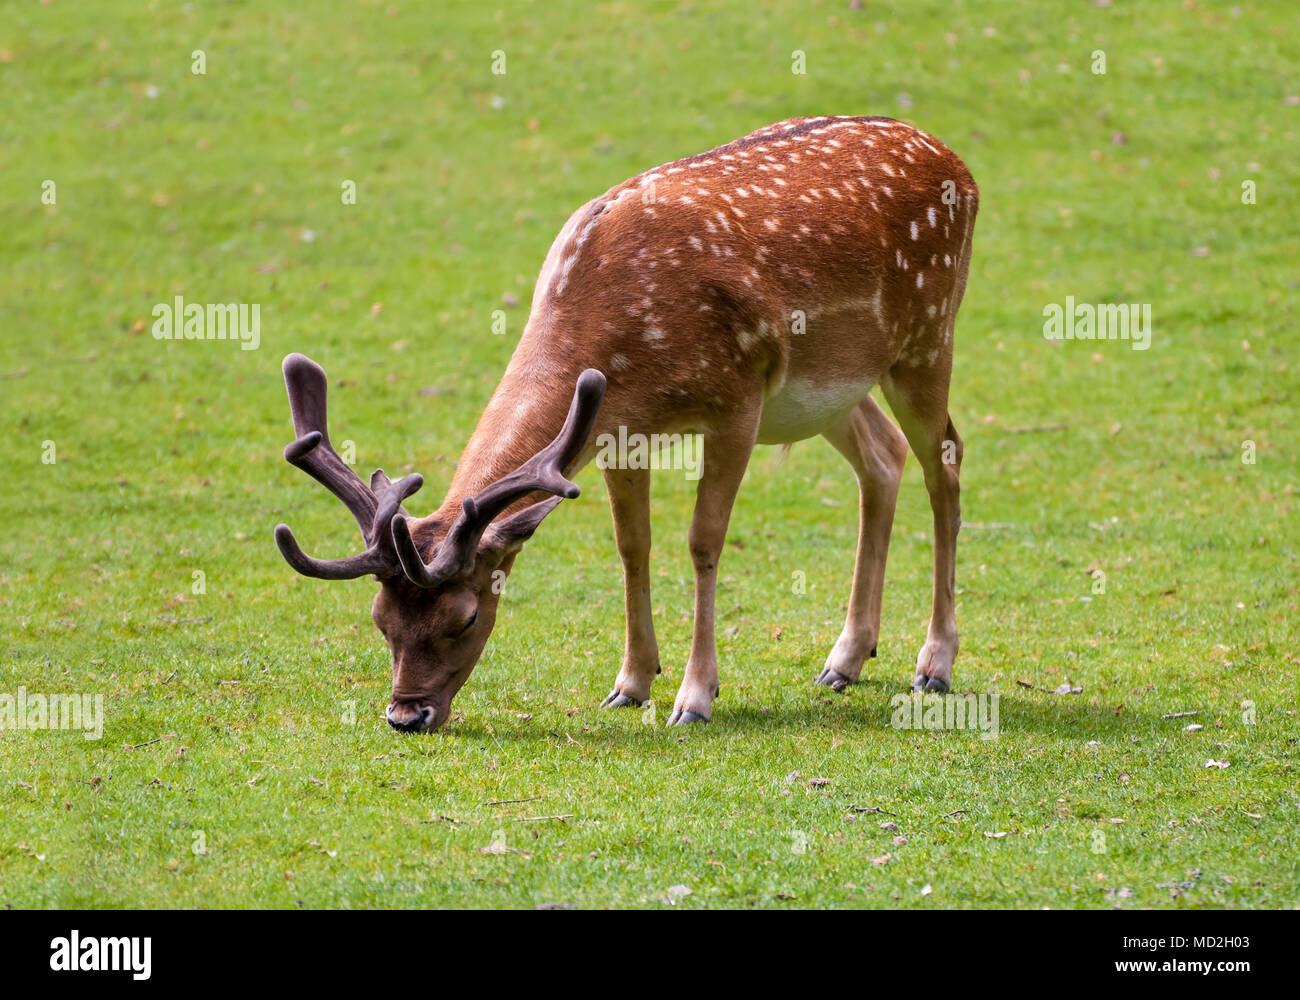 Young deer eating on green grass. Stock Photo